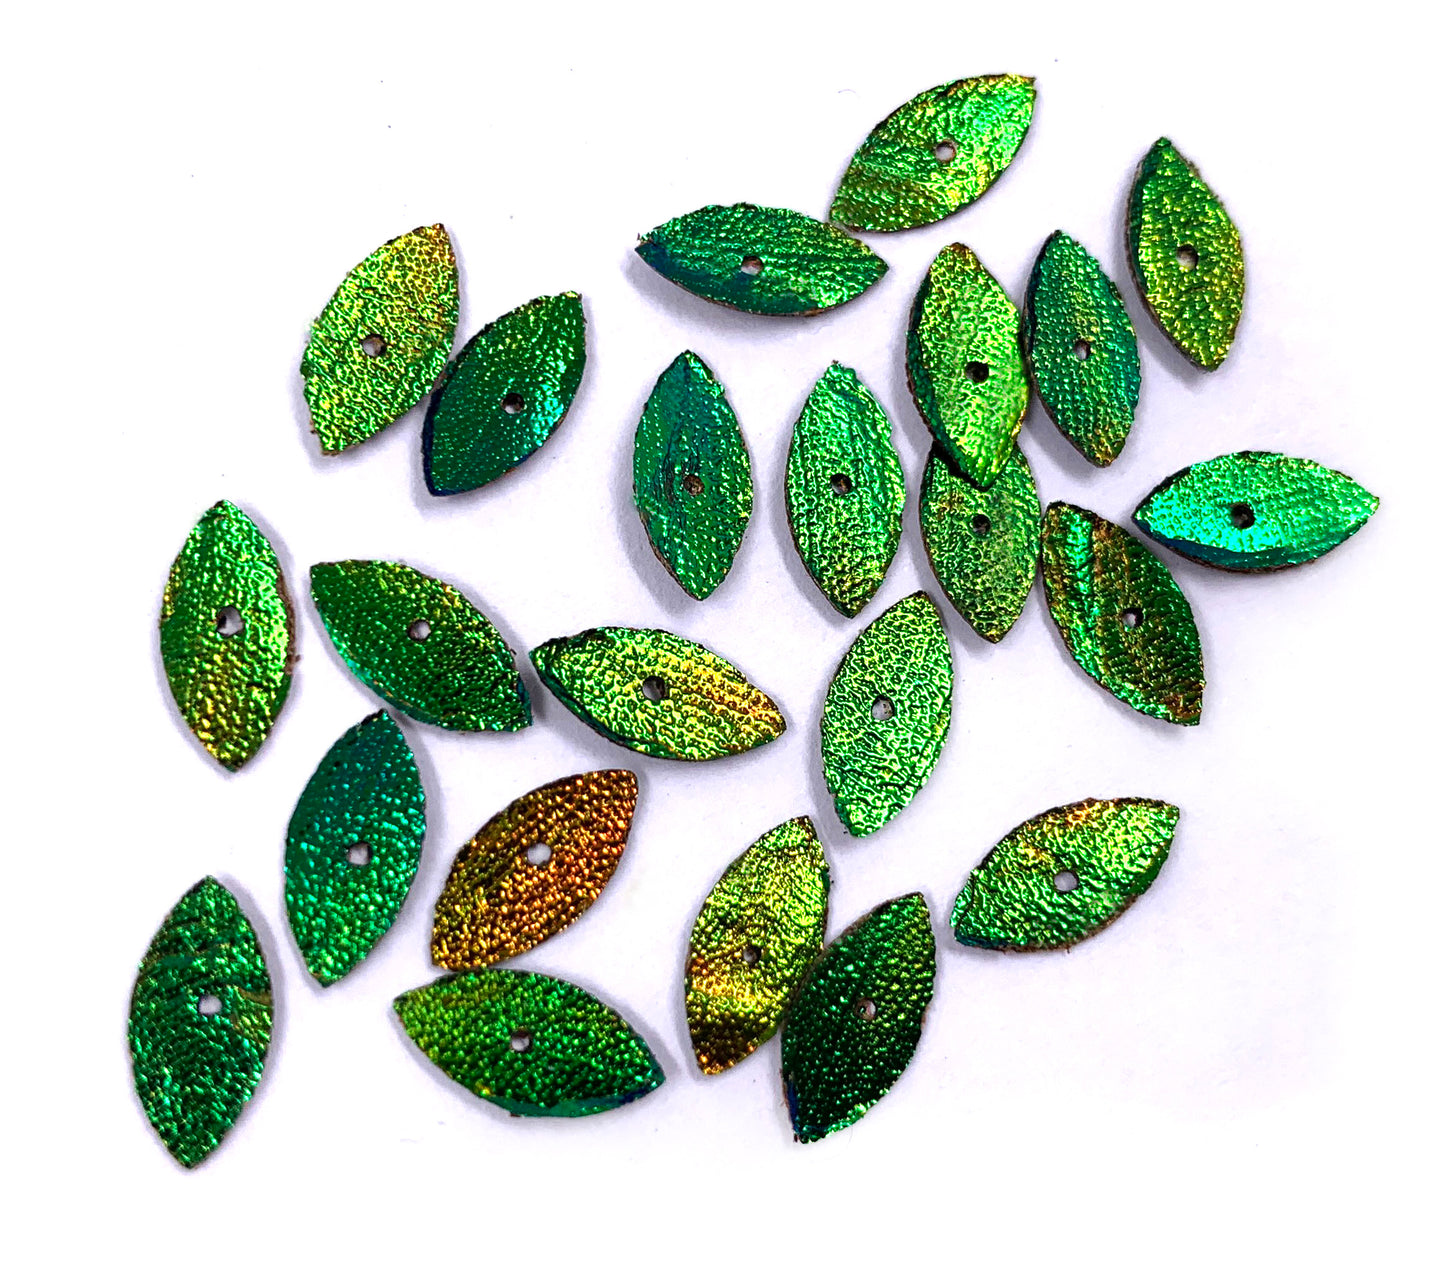 Jewel Beetle Wings DRILLED with HOLE 100 Pcs Natural Wings - Rice Grain Marquise 1 CM x 0.5 CM